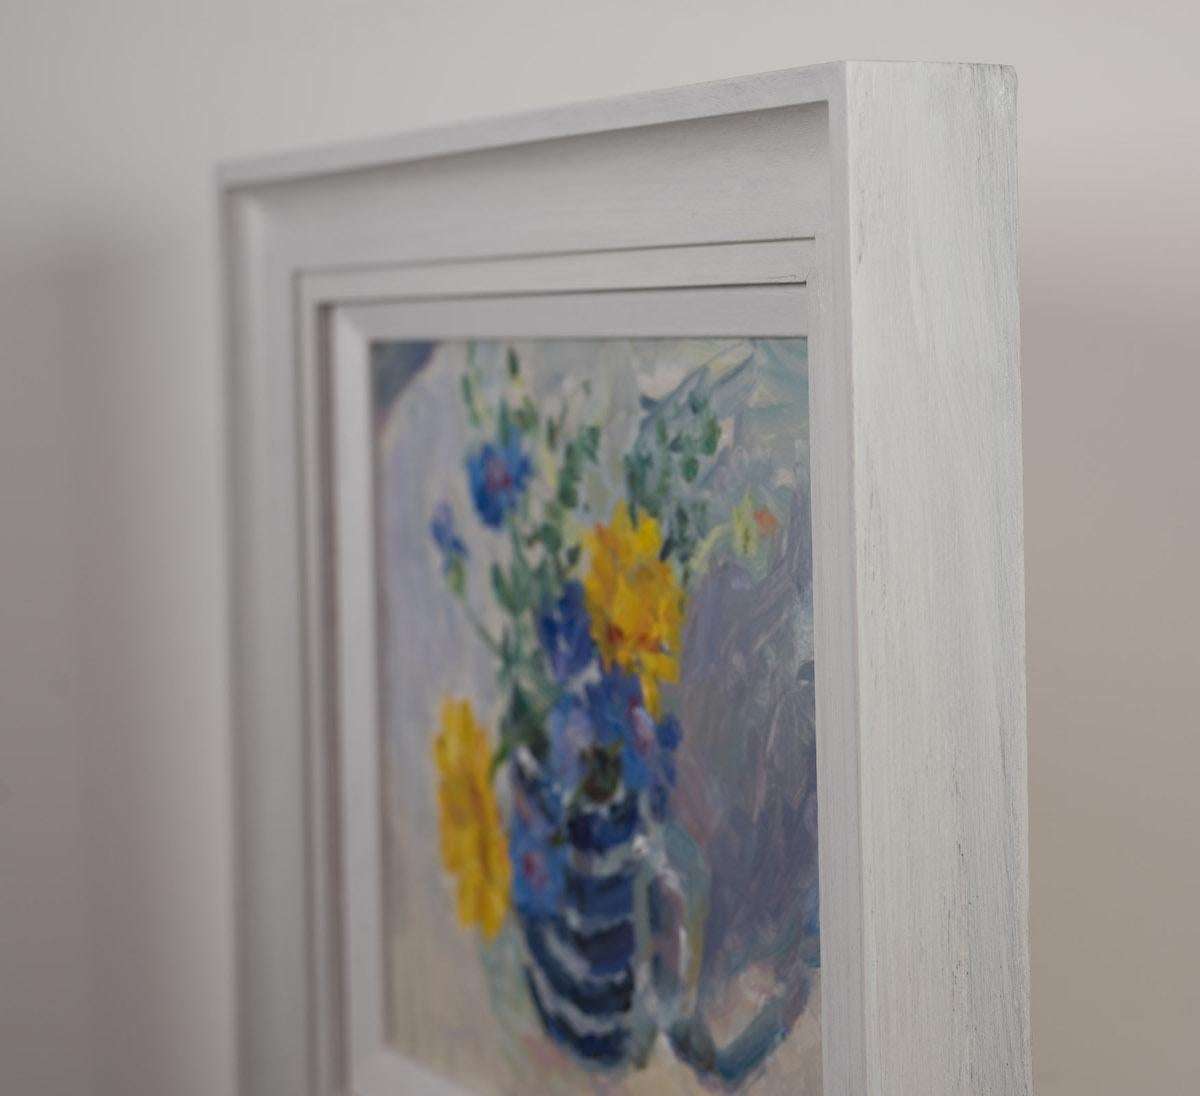 Marigolds, Cornflower and Thyme [2022]
Please note that insitu images are purely an indication of how a piece may look.
Painted from life, flowers grown by the artist. Signed and labeled on the back of the picture and the back of the frame.